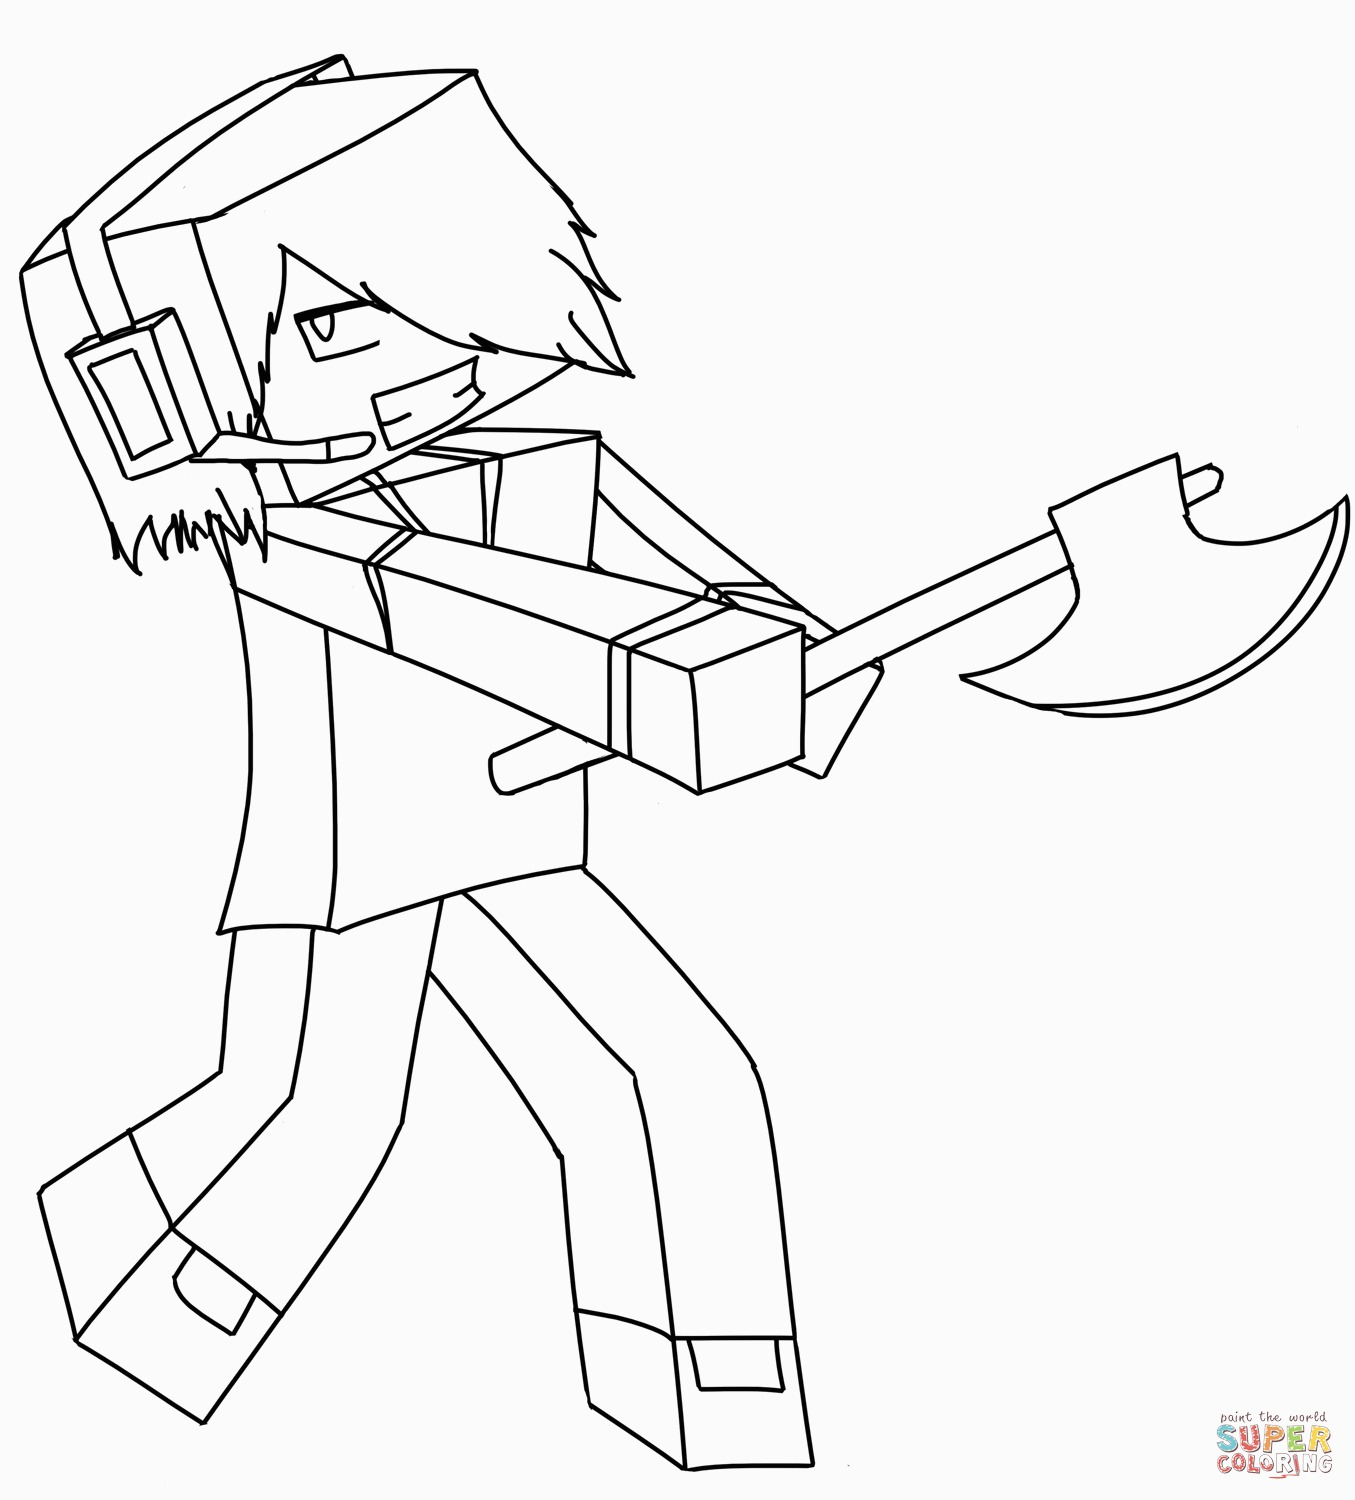 Creative Photo of Herobrine Coloring Pages - vicoms.info